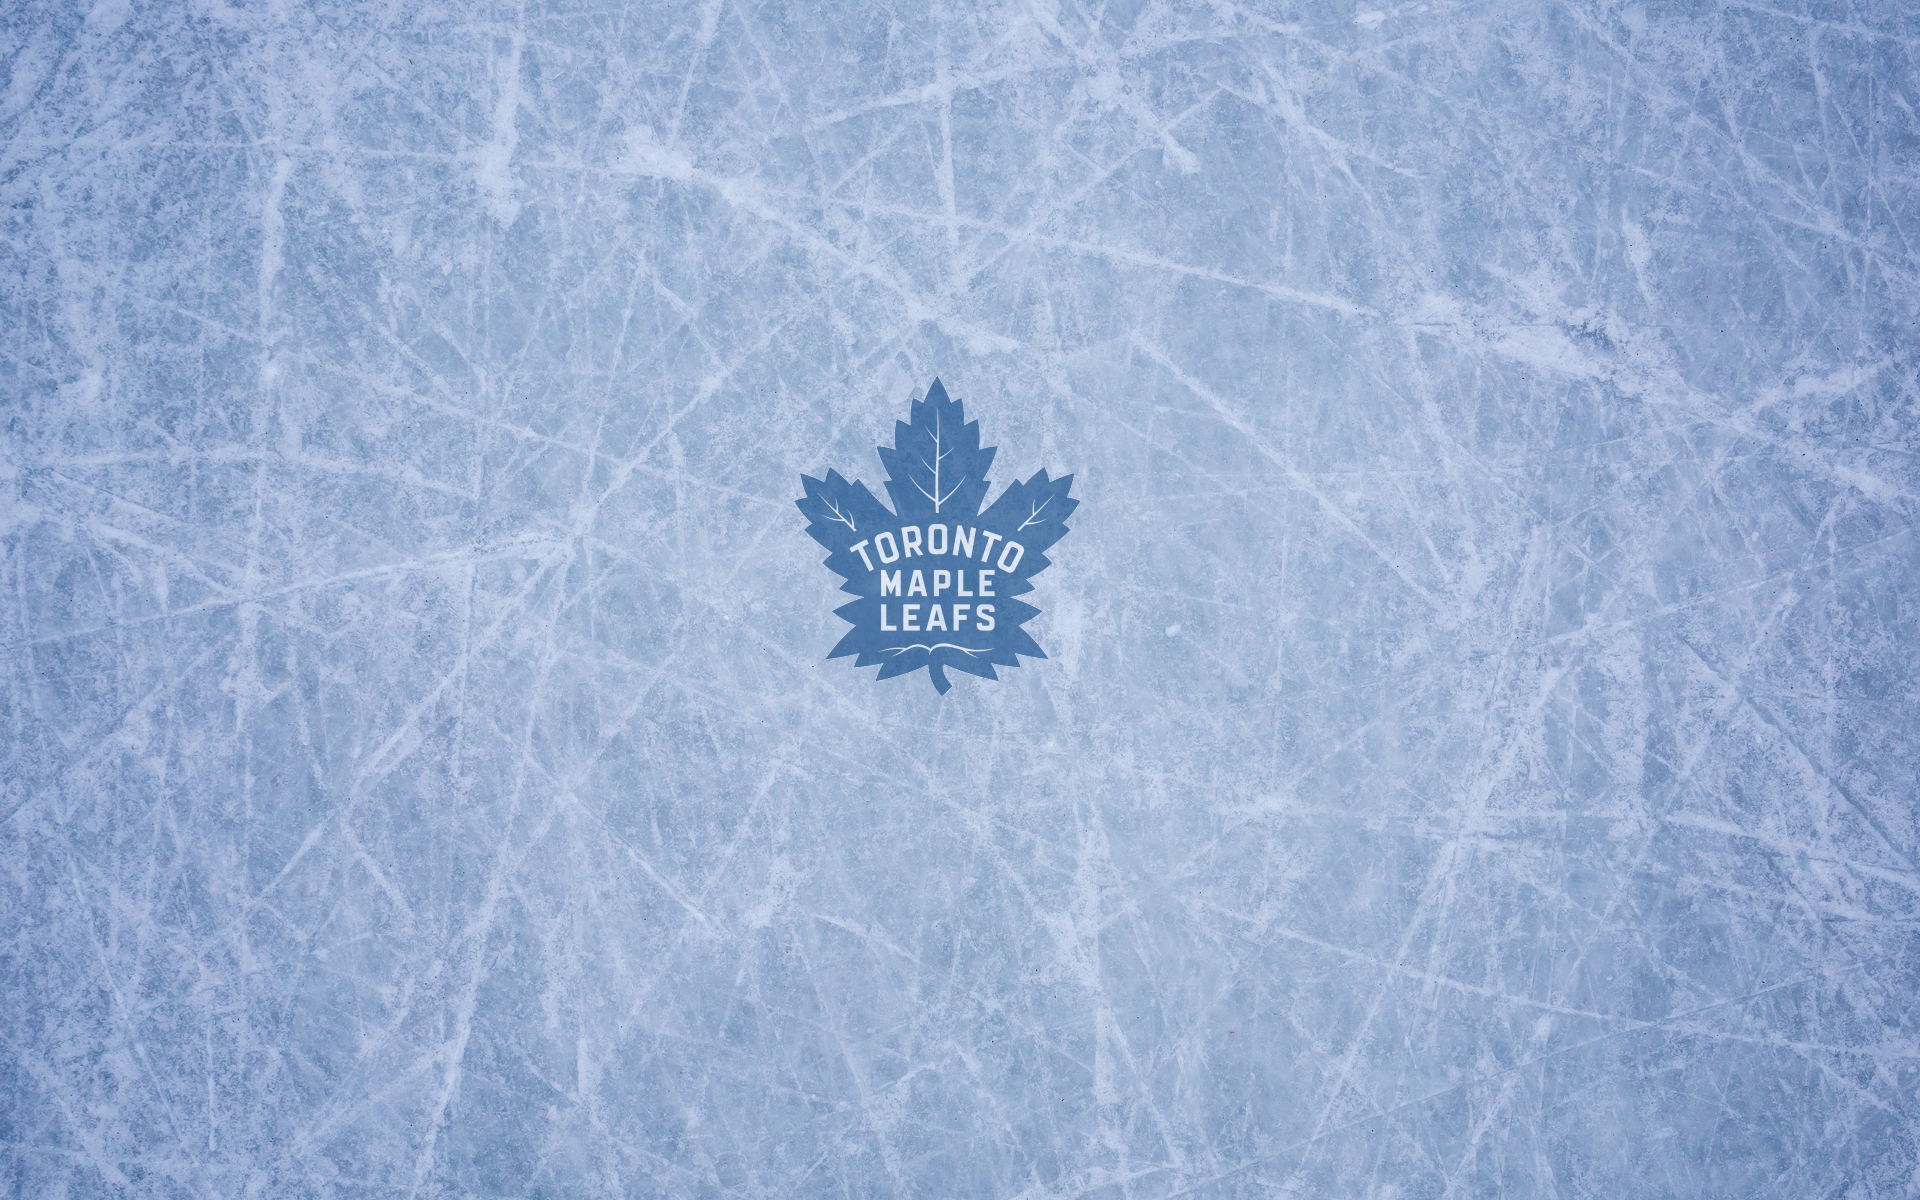 Toronto Maple Leafs wallpaper with ice